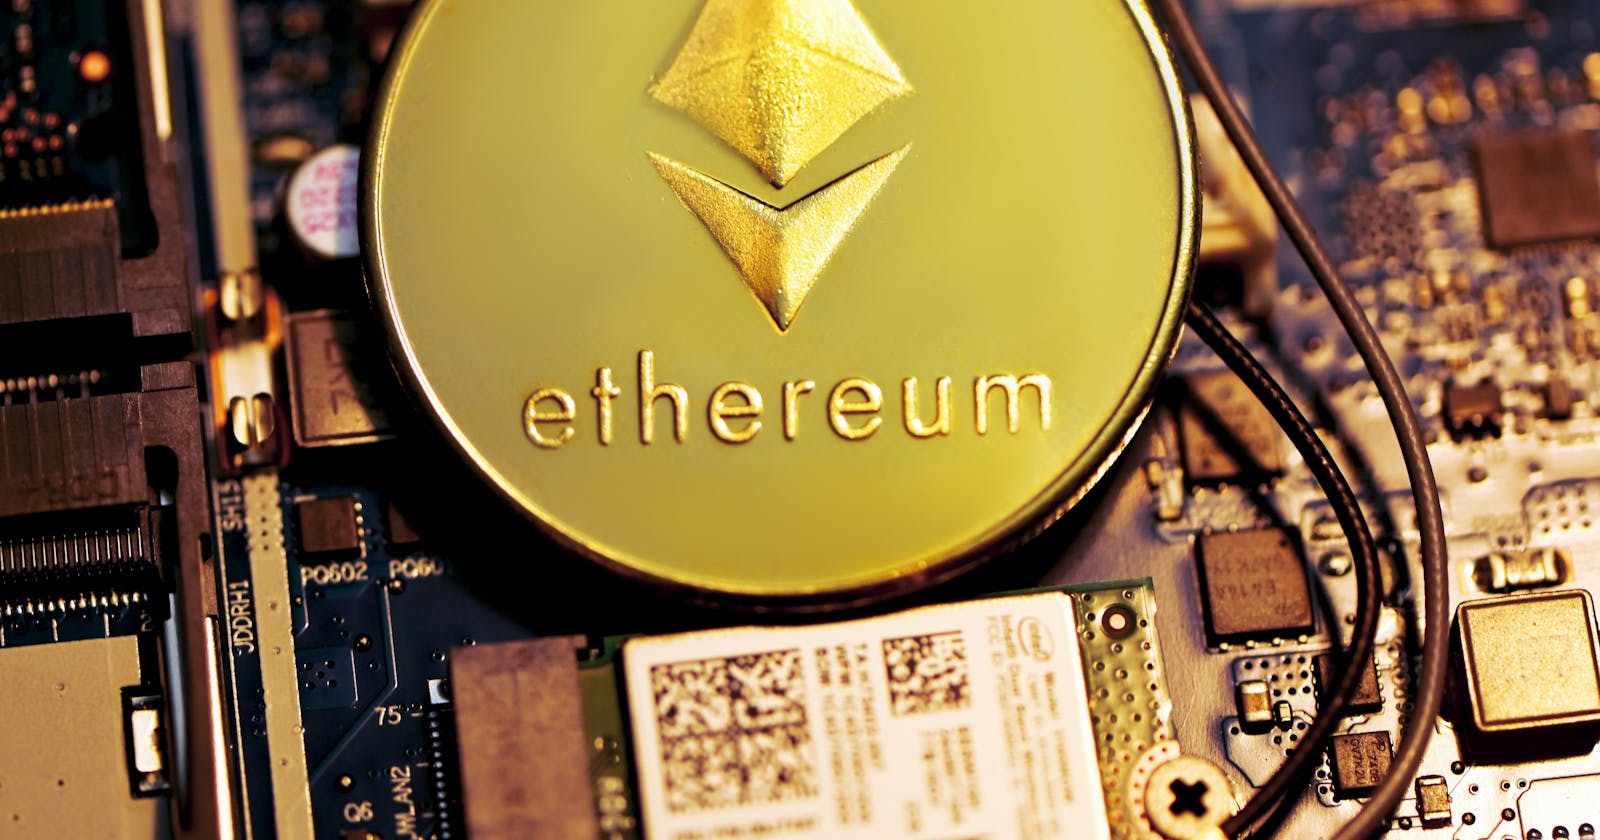 5 Things You Don't Know About Ethereum 2.0